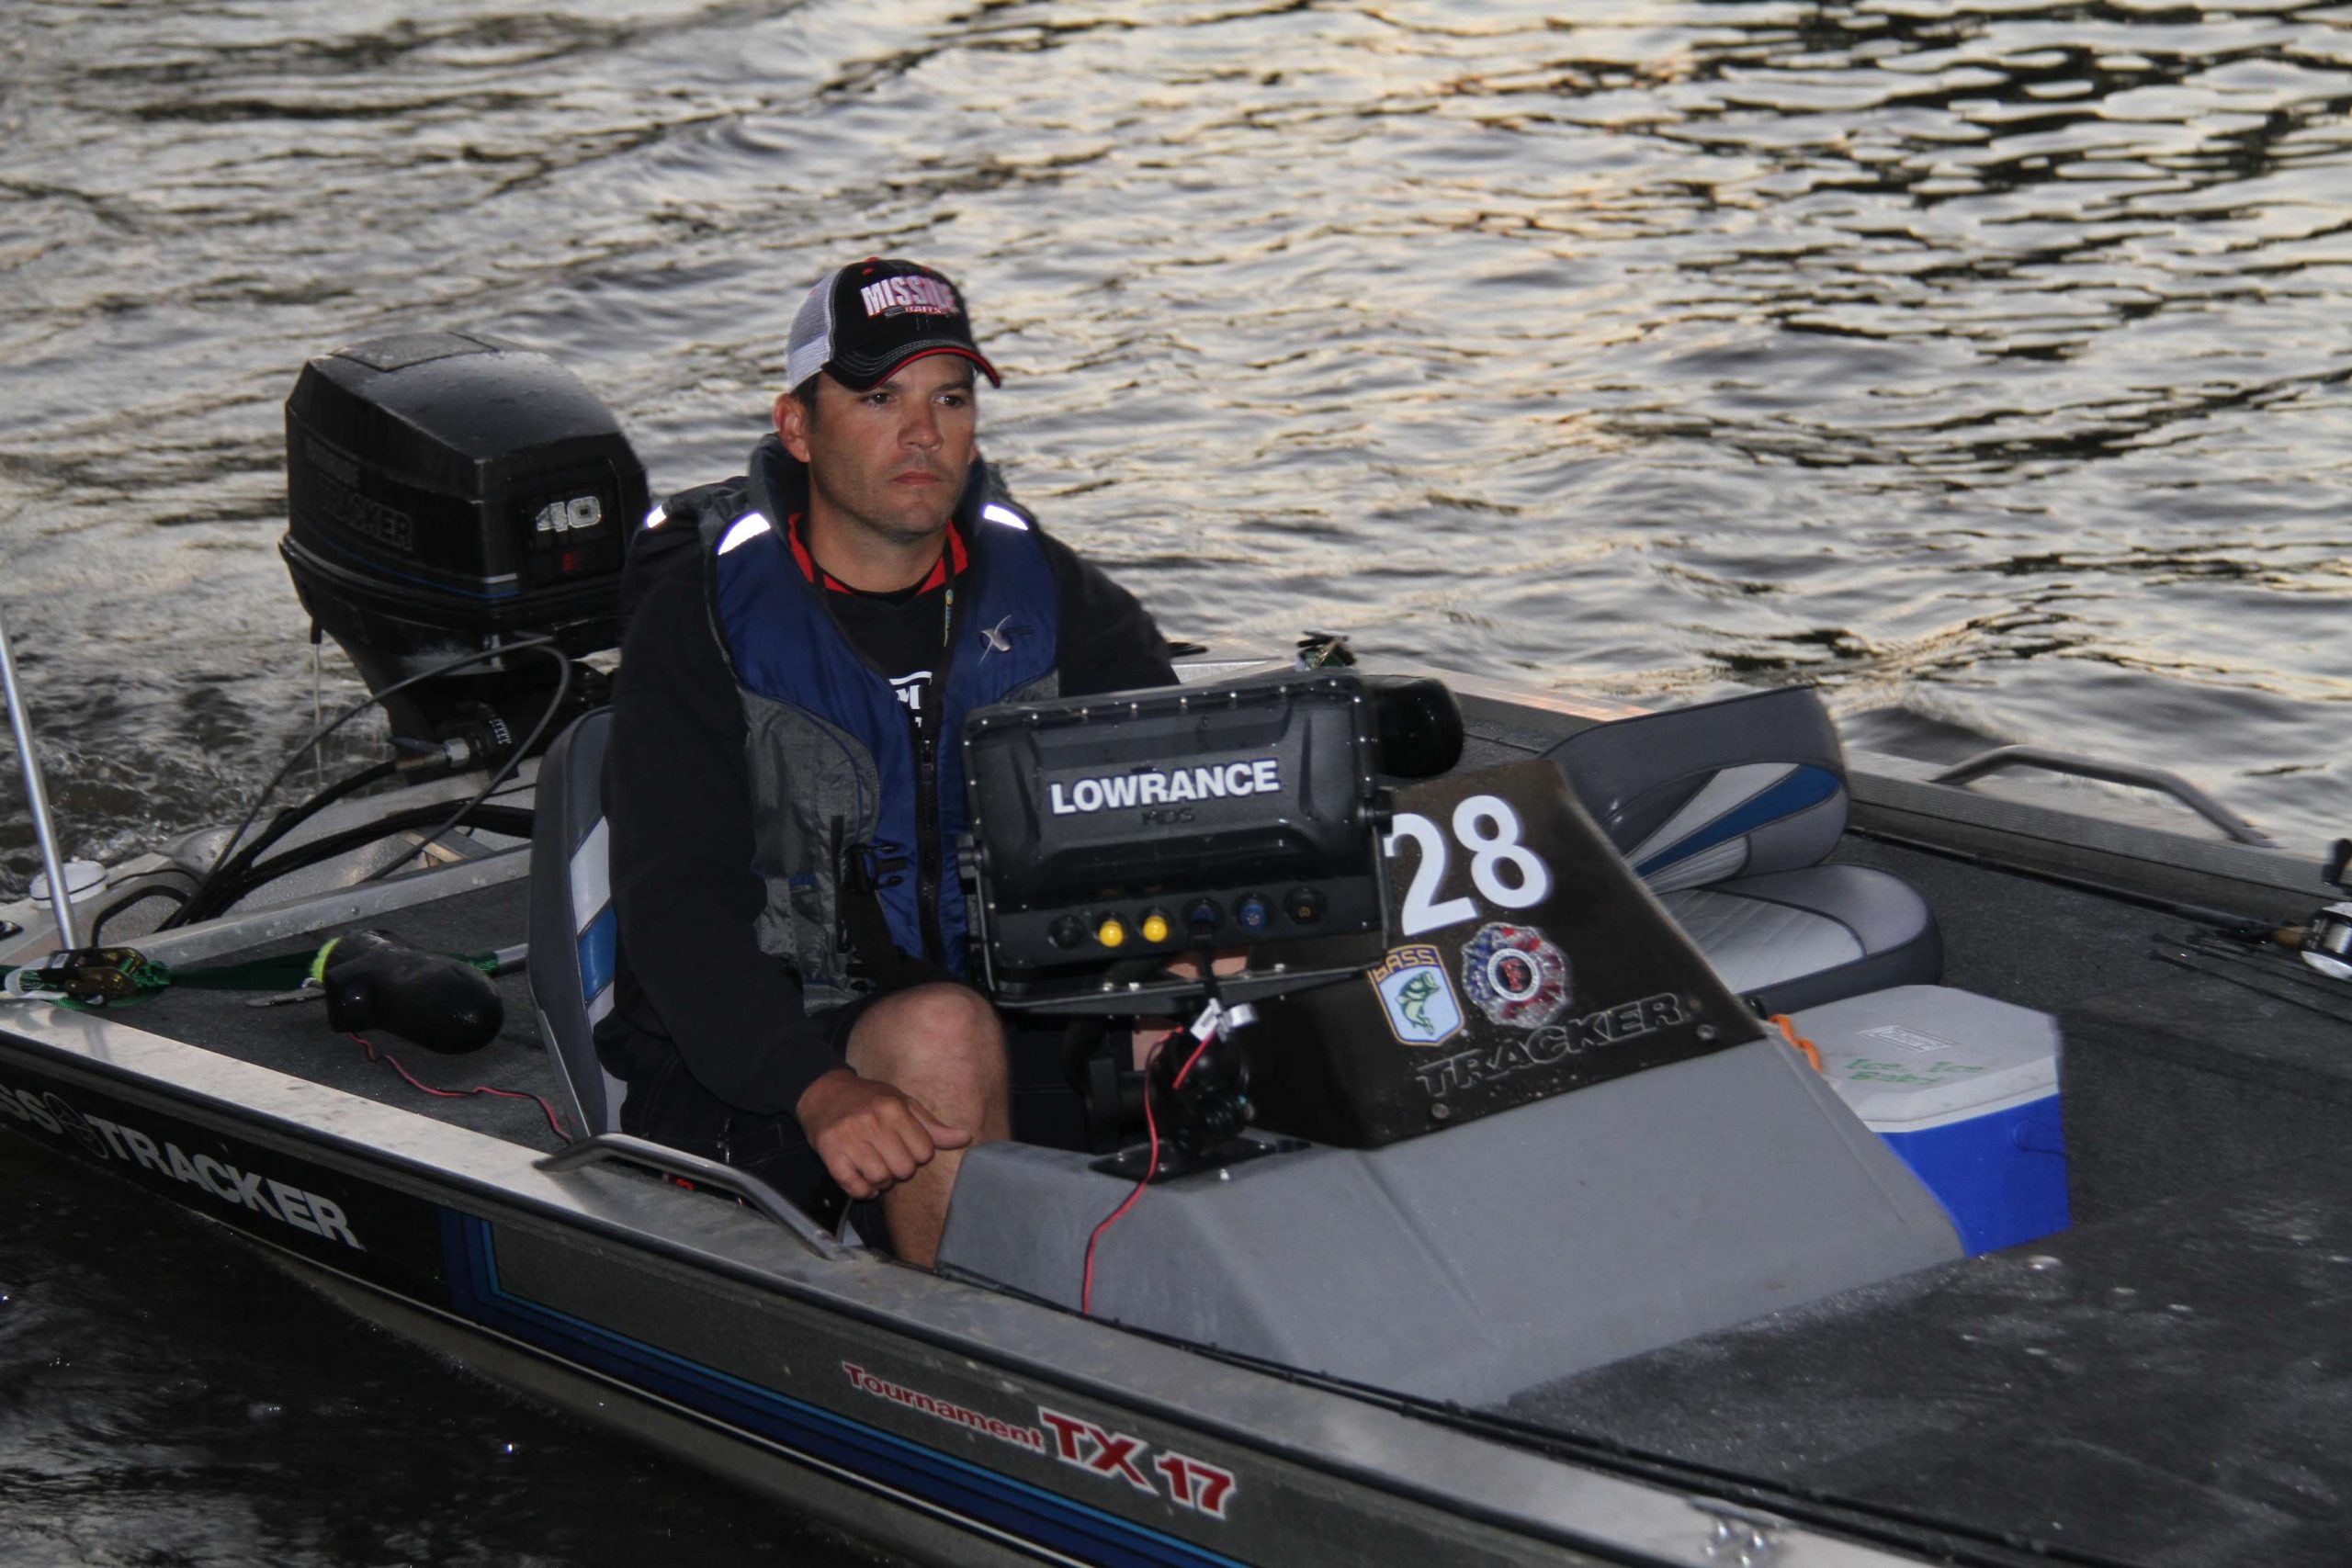 Jamie Laiche of Louisiana is focused on fishing in his home state.